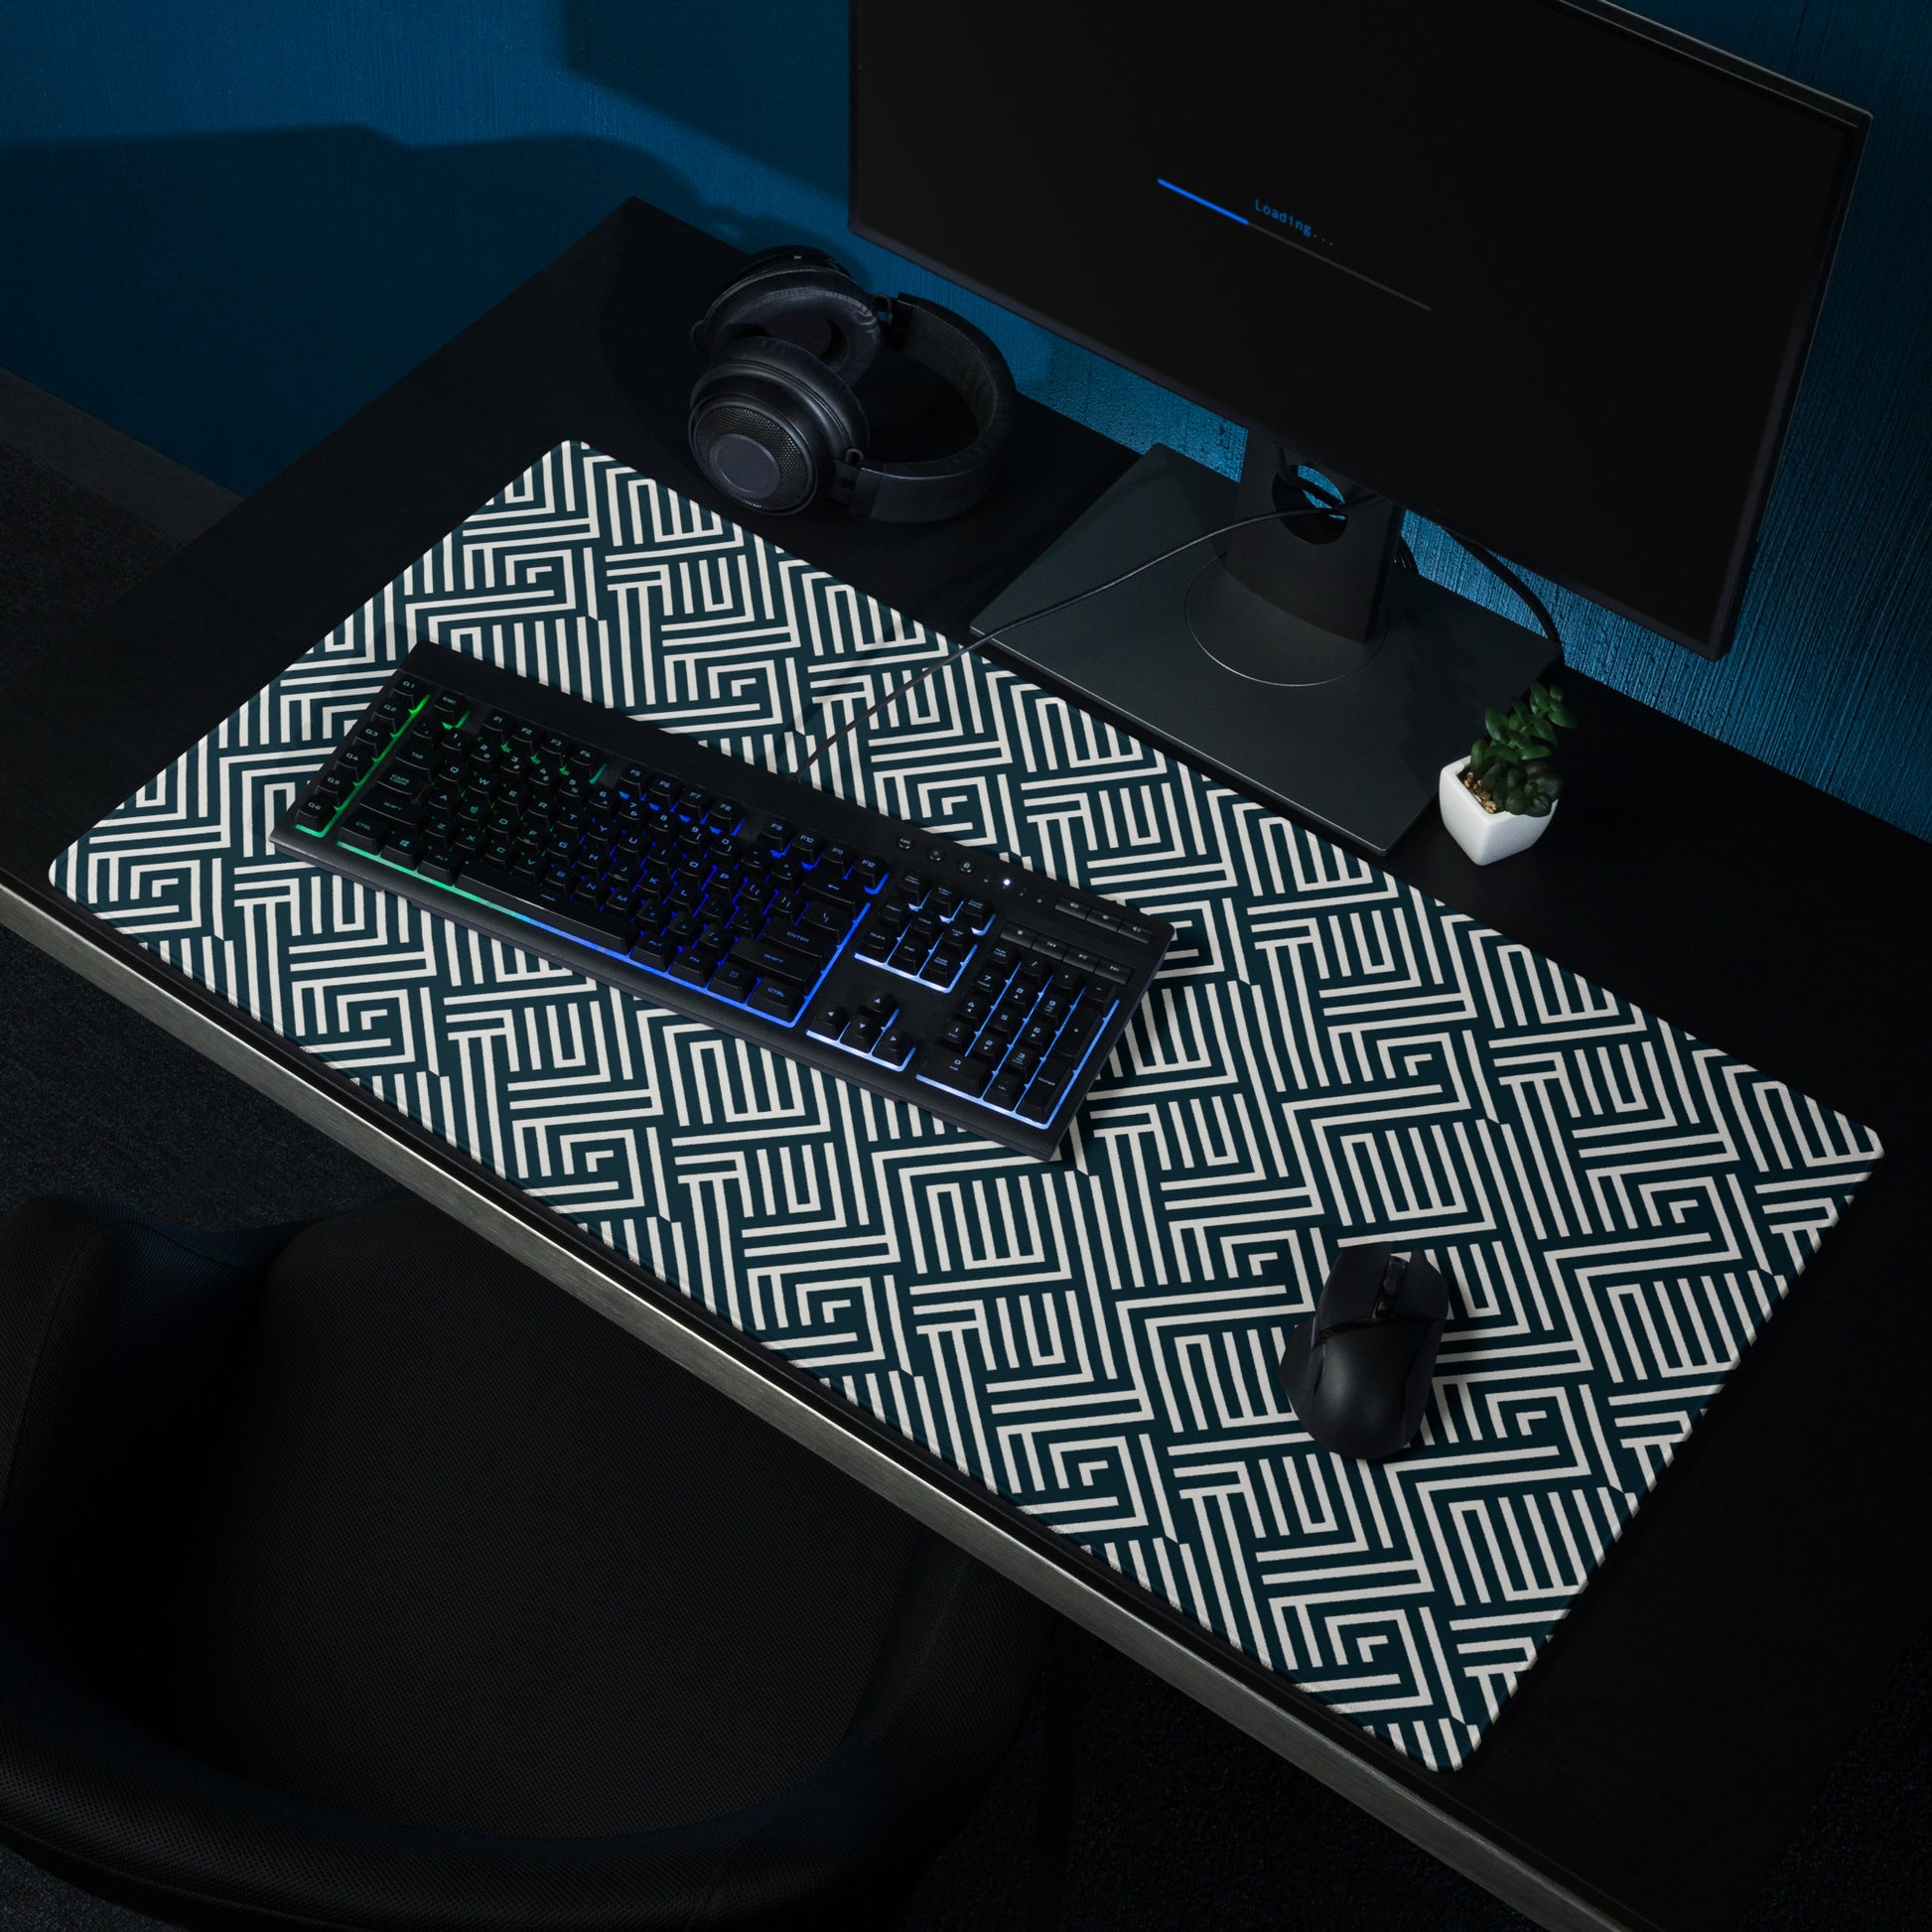 A 36" x 18" gaming desk pad with white lines on a black background. It sits on a black desk with a keyboard, monitor, and mouse.